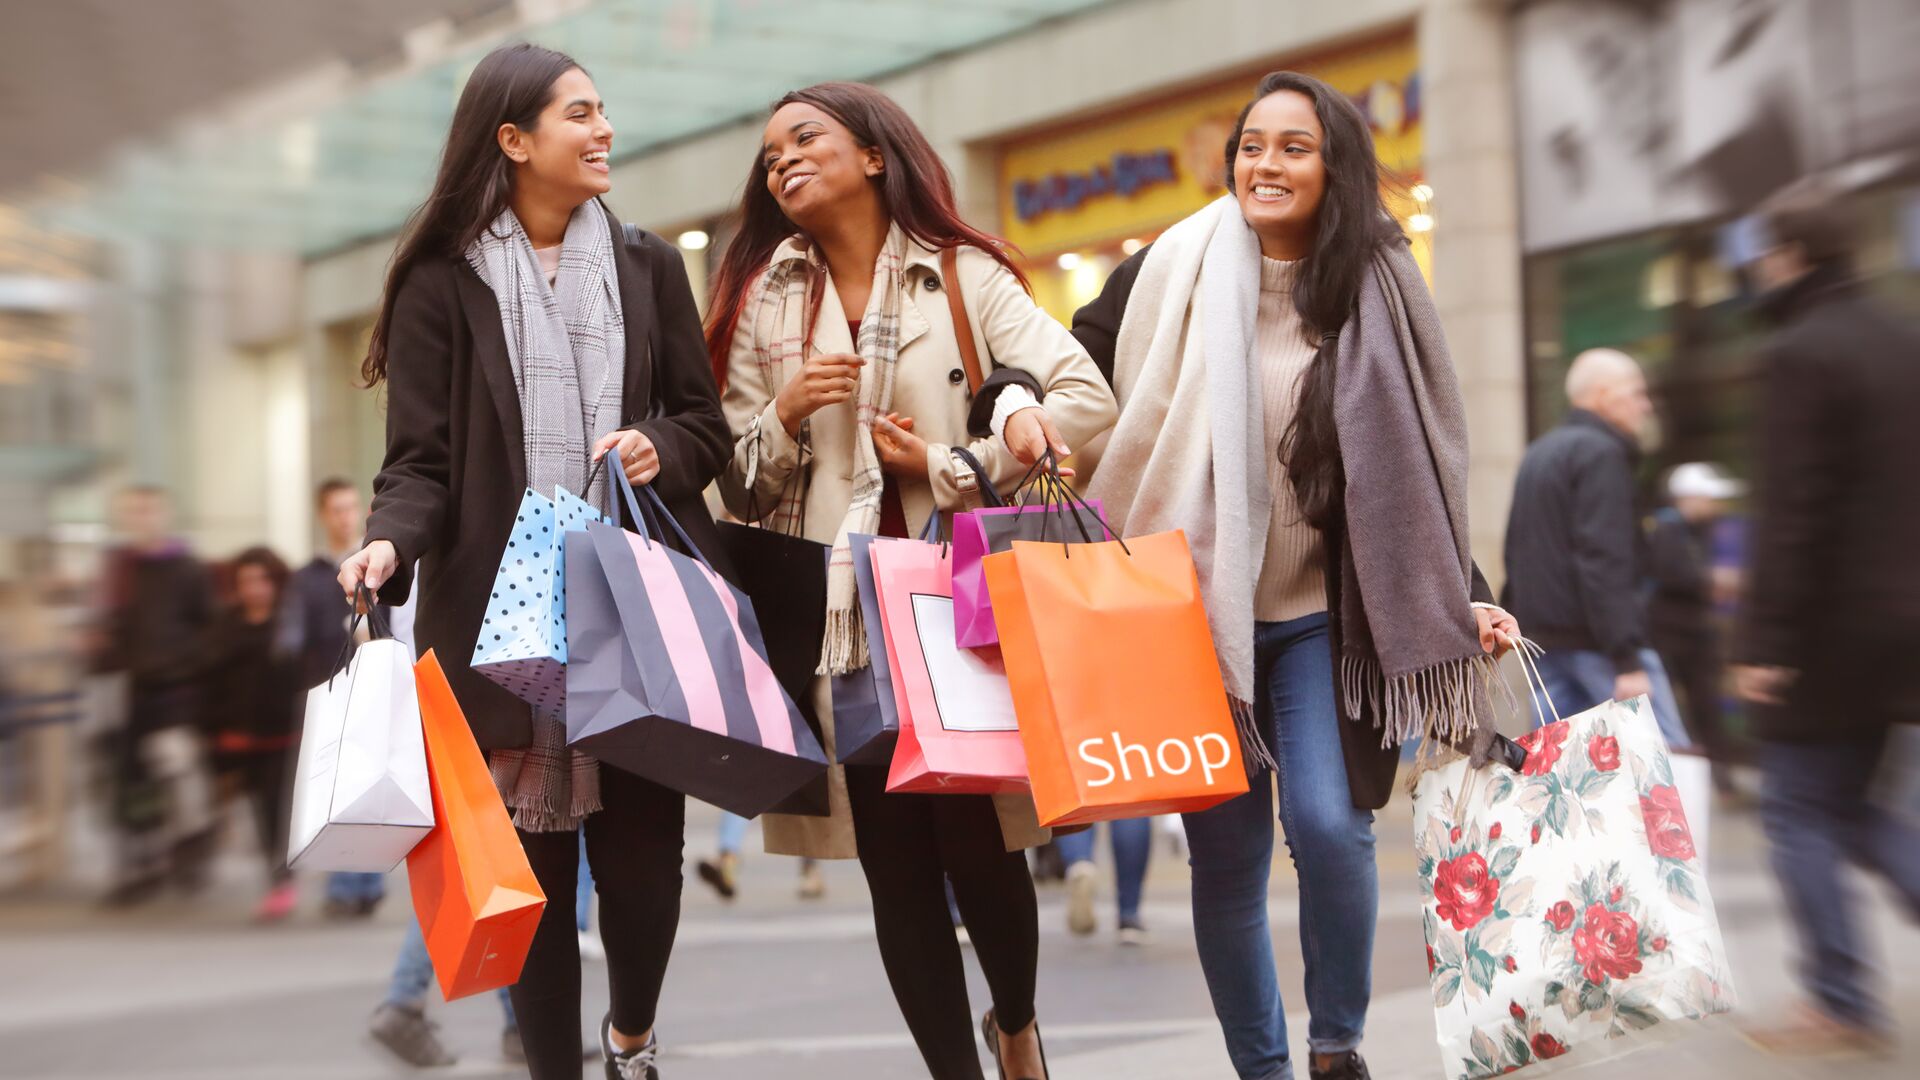 Young shoppers representing the Millennial & Gen Z consumer